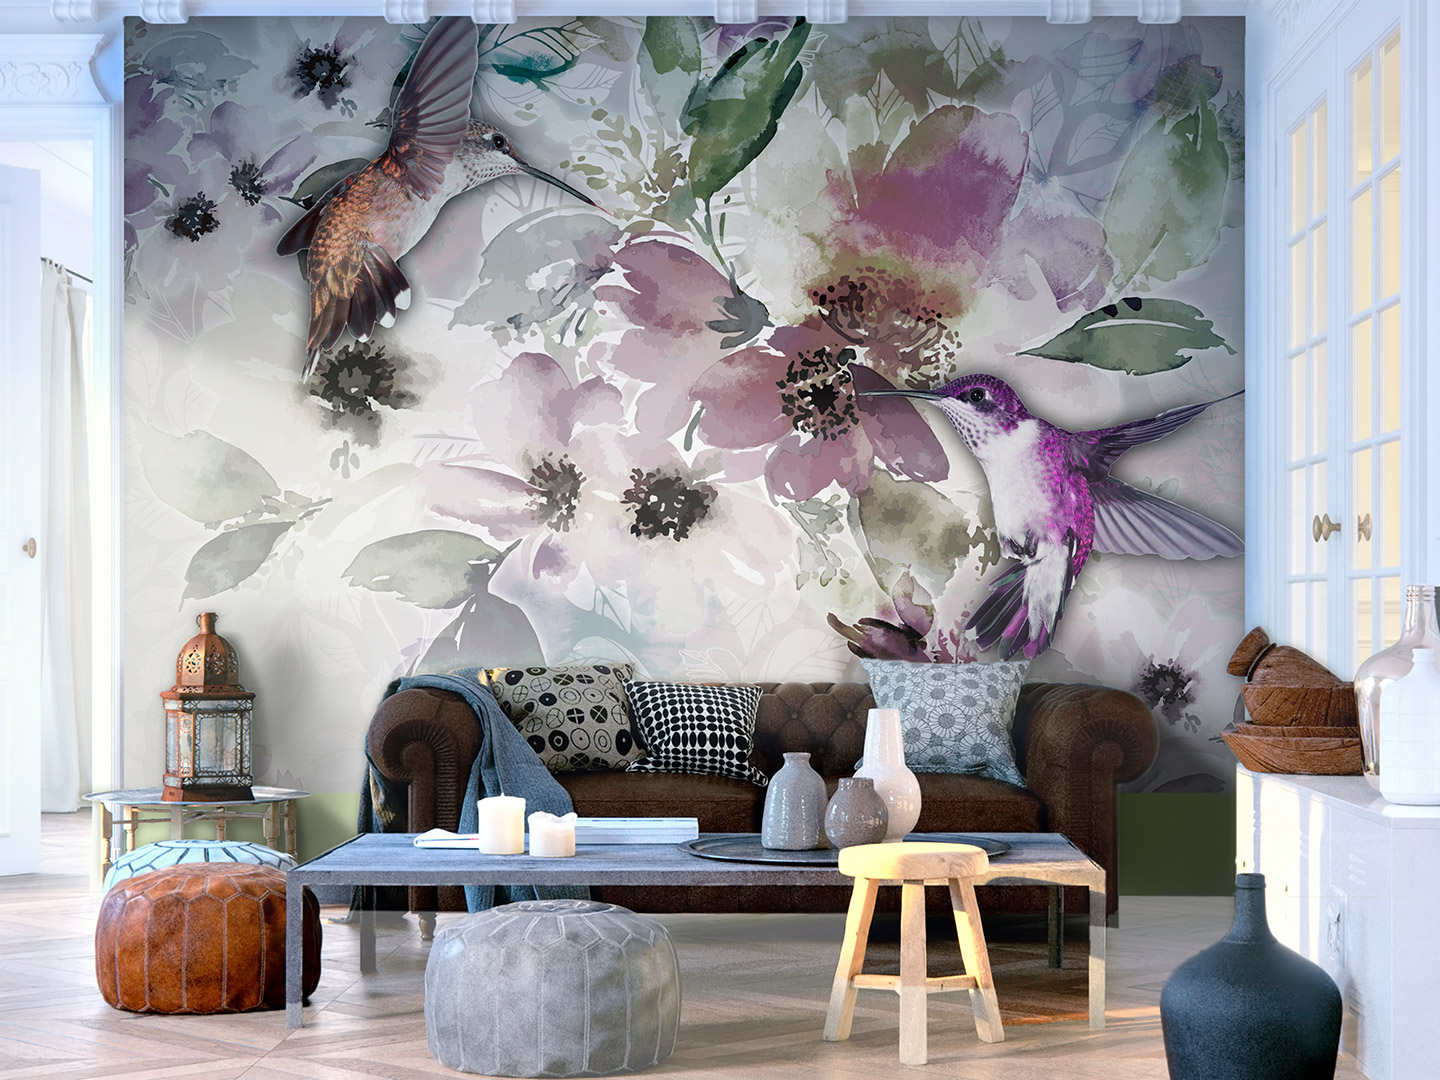 home decor premium photography large bedroom 3d wall paper for walls picture DIY decorative panel poster xxl high quality digital roll living room